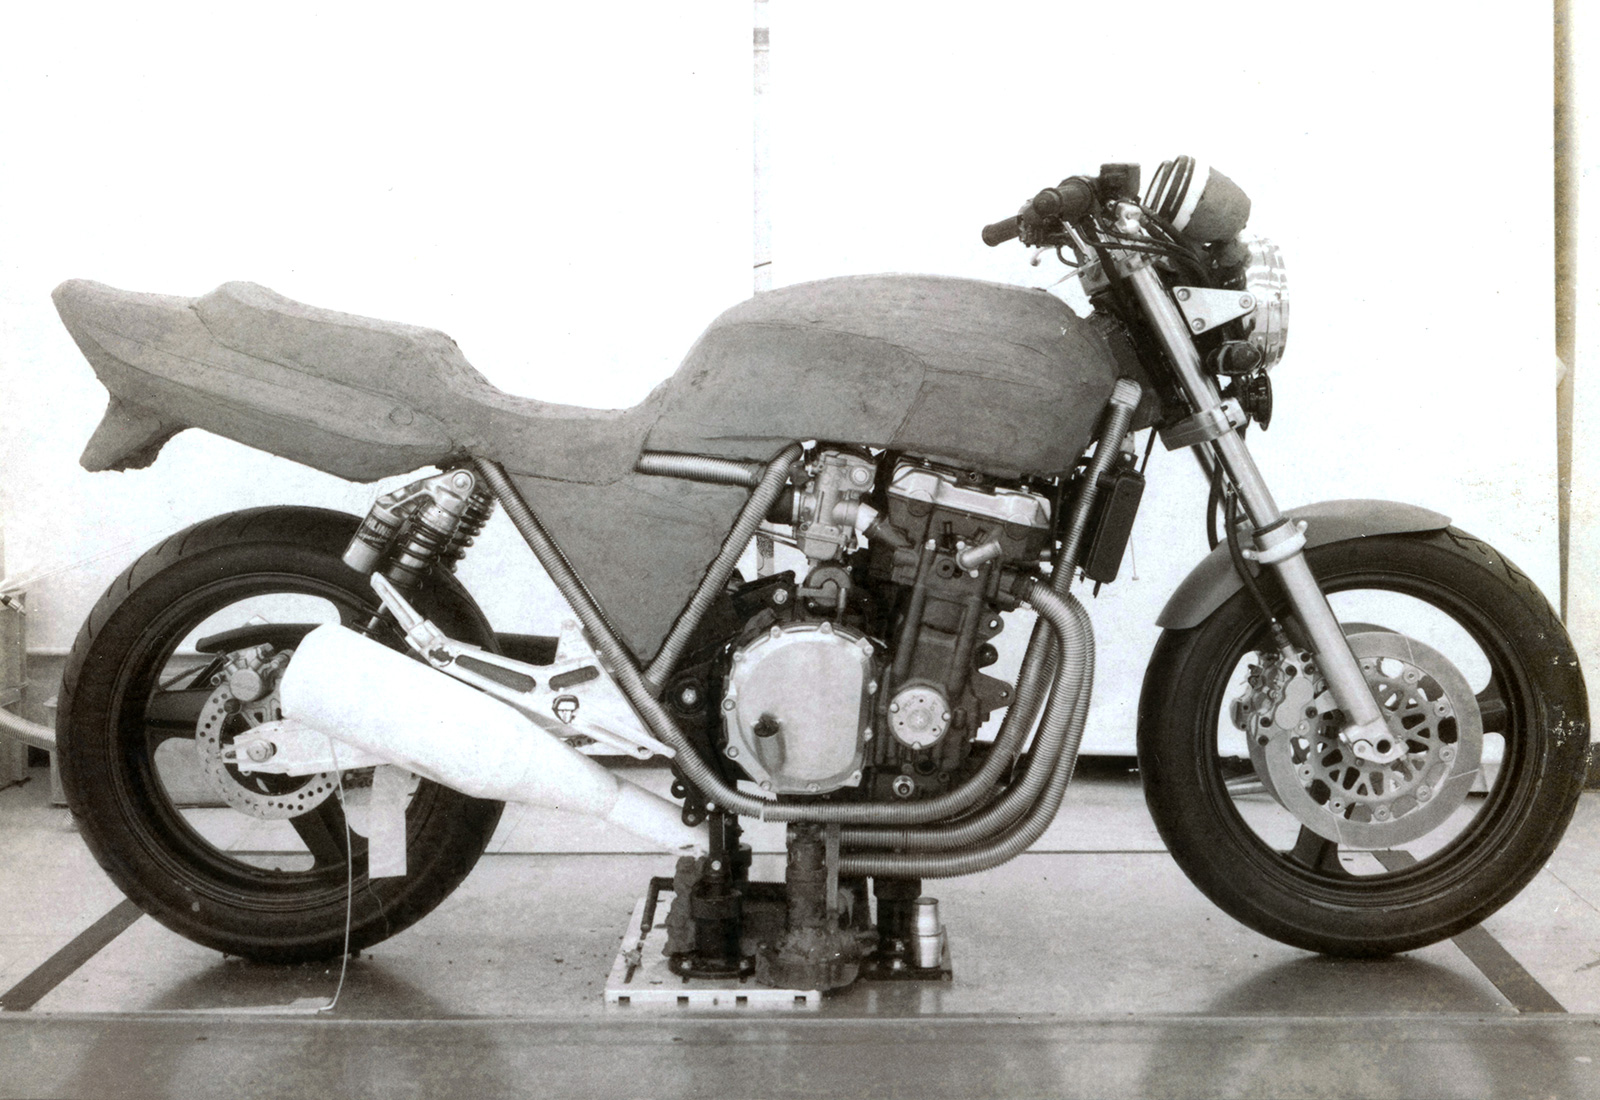 CB1000 SUPER FOUR clay model consideration. The frame and exhaust system are hand-bent flexible pipes, the muffler is carved from urethane foam, and the step halter is cardboard. Almost “with something attached” stage